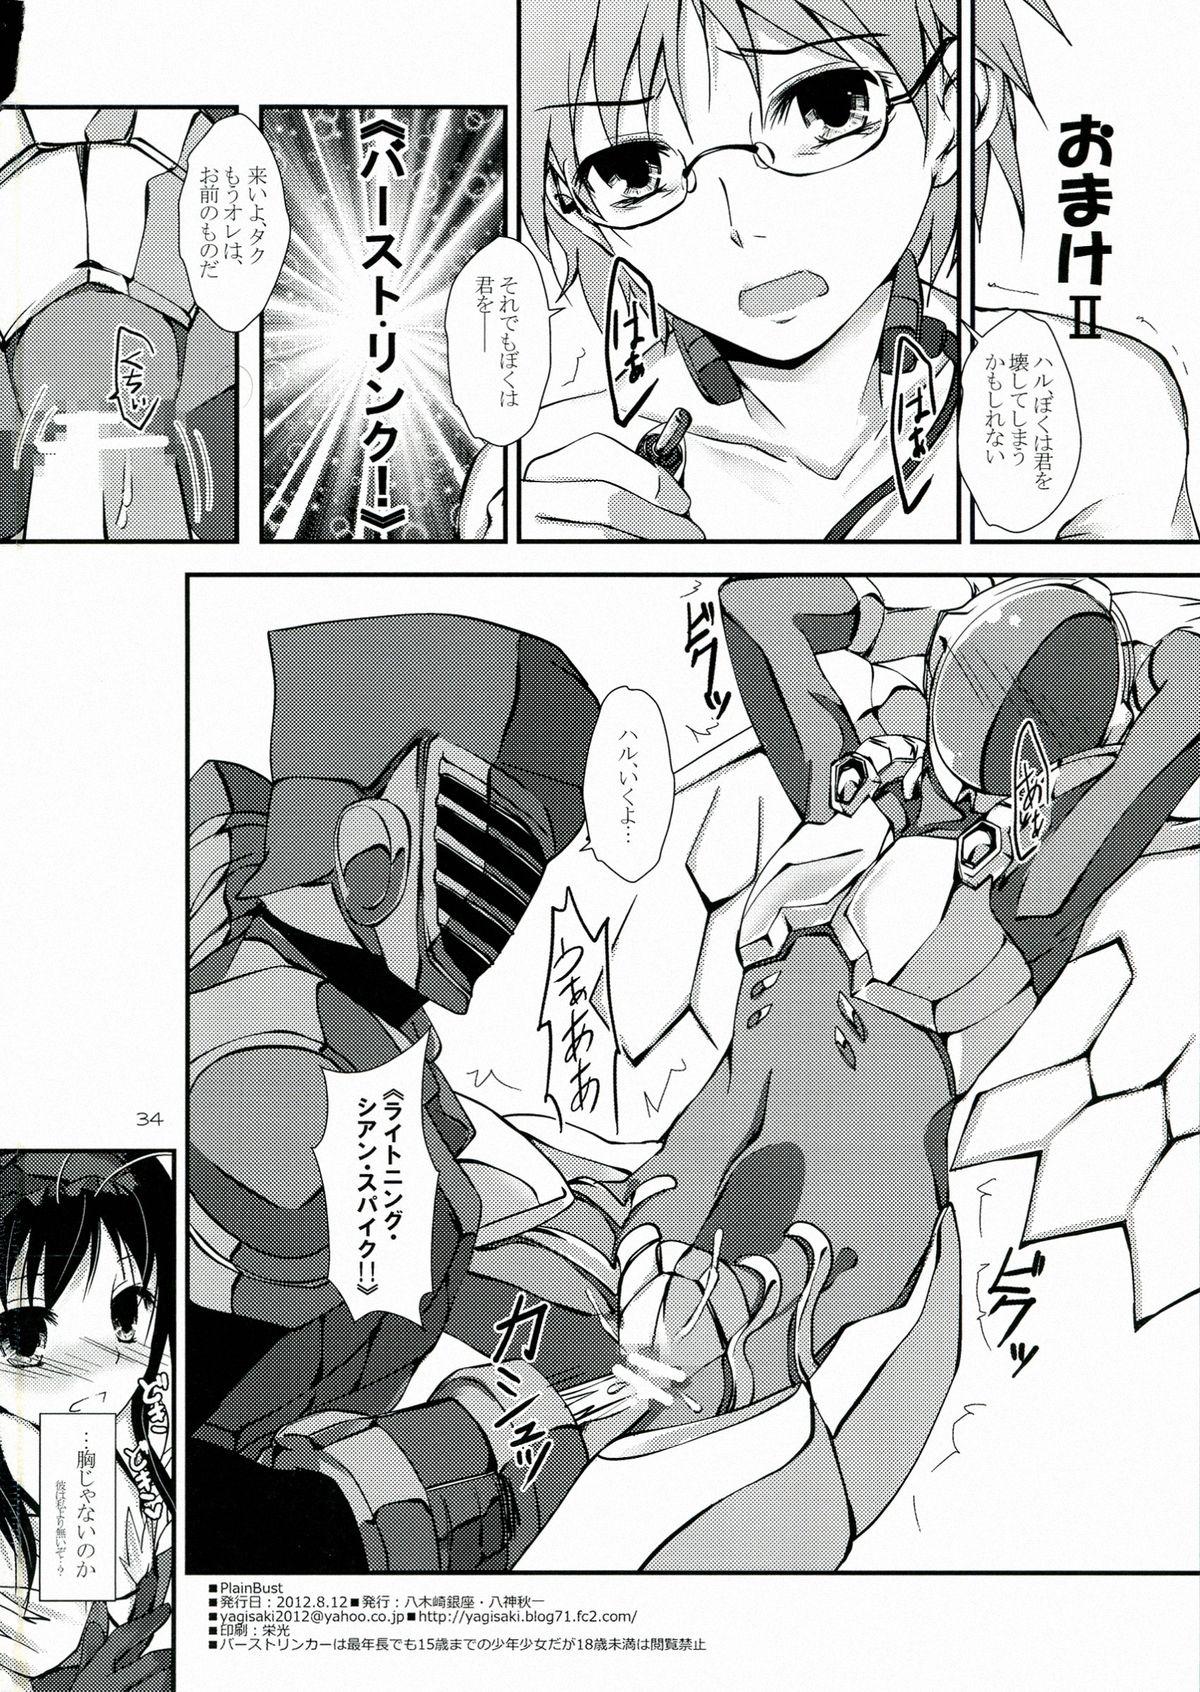 Old PlainBust - Accel world Facials - Page 34